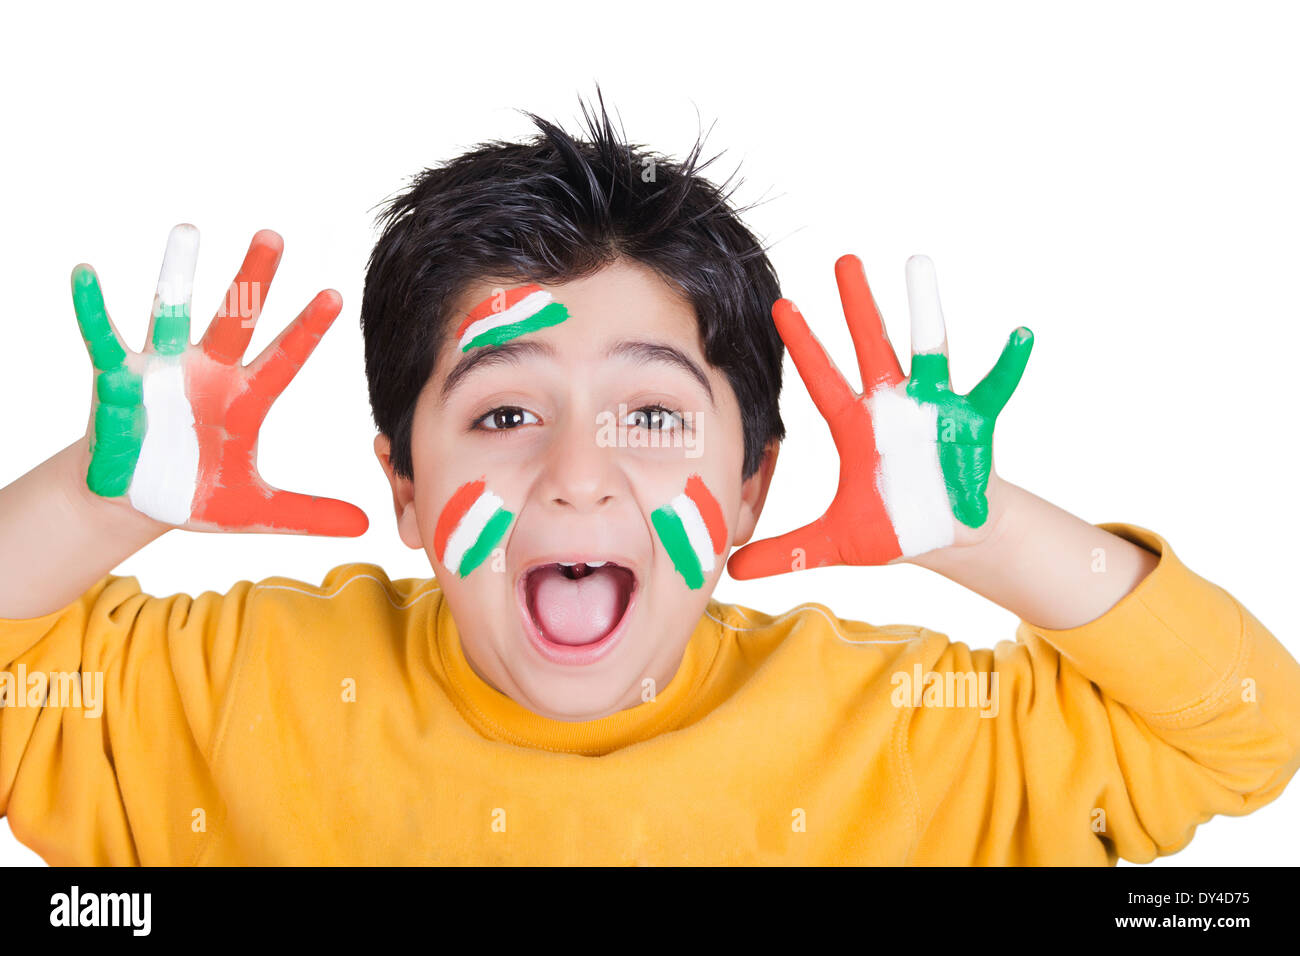 Indian Culture Child with Flag Stock Photo